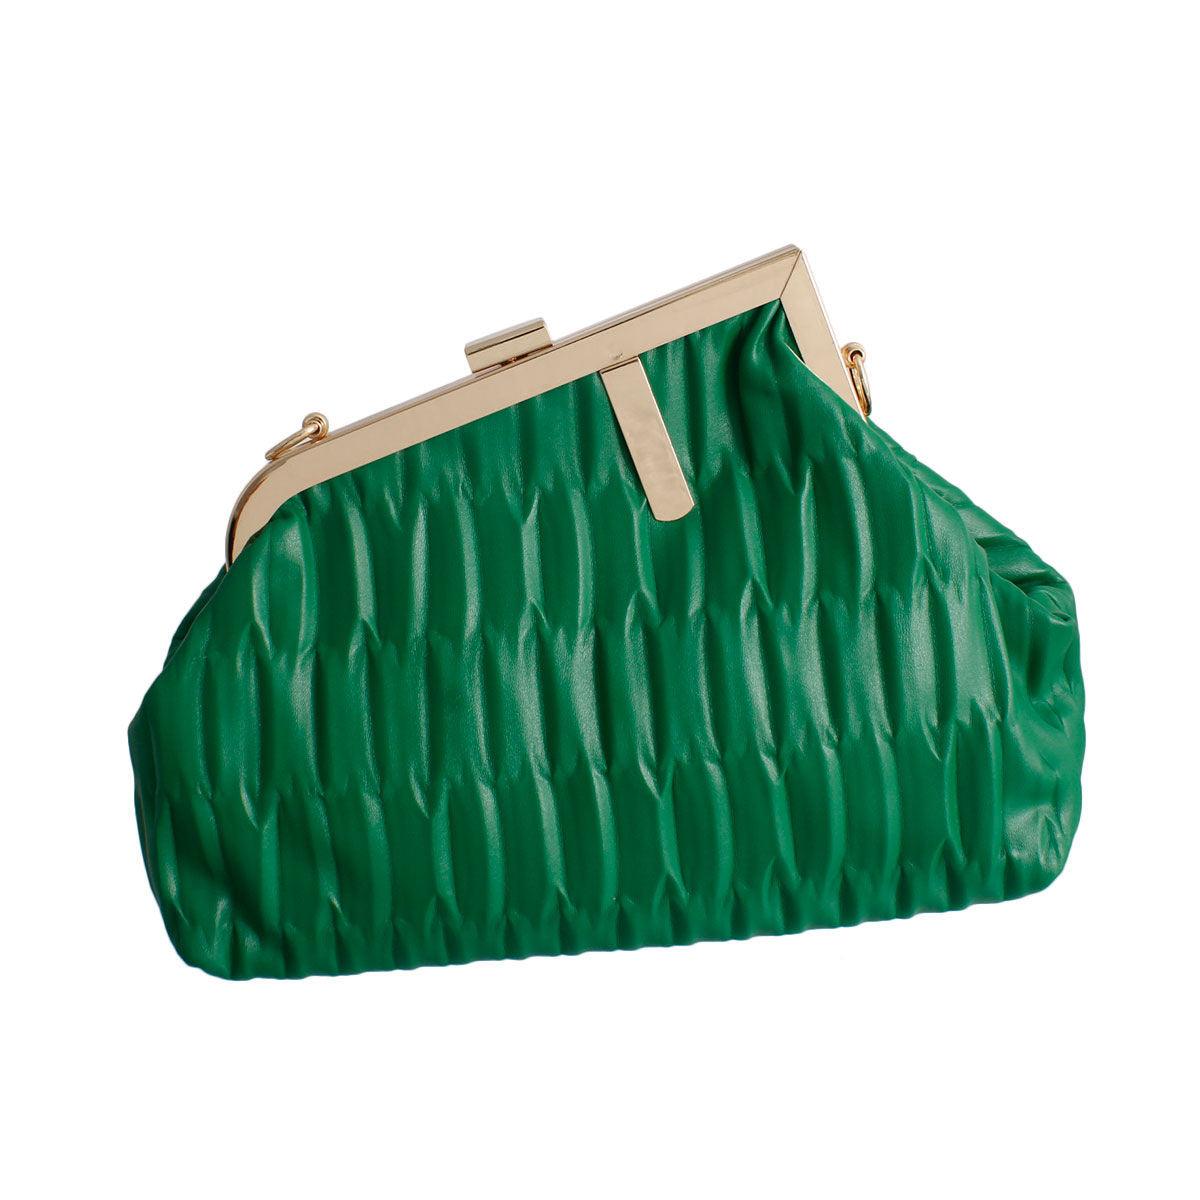 Luxury Green Ribbed Angled Frame Clutch Bag - Buy Now!